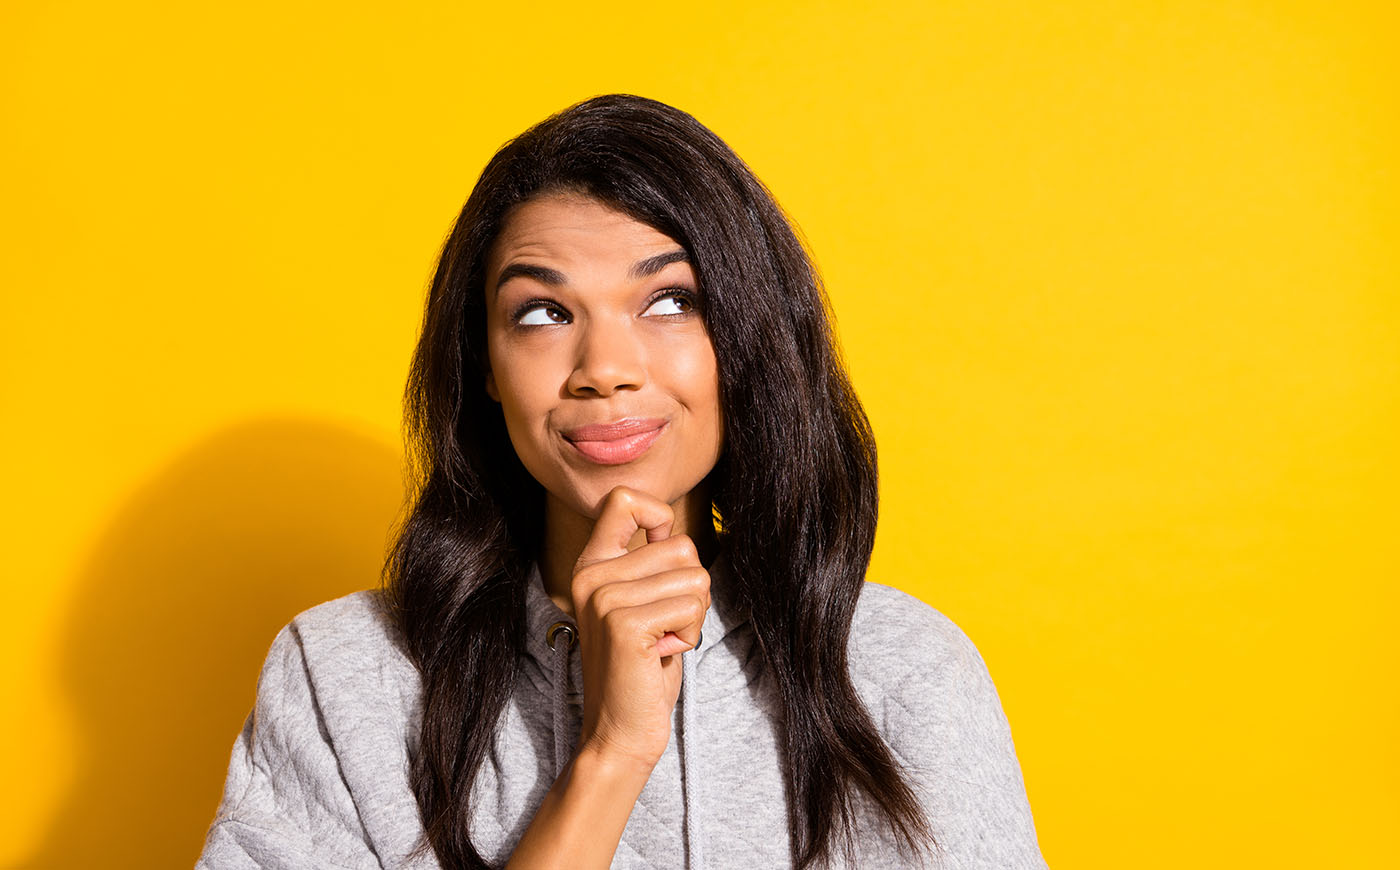 Black woman looking curiously upward in front of a yellow background